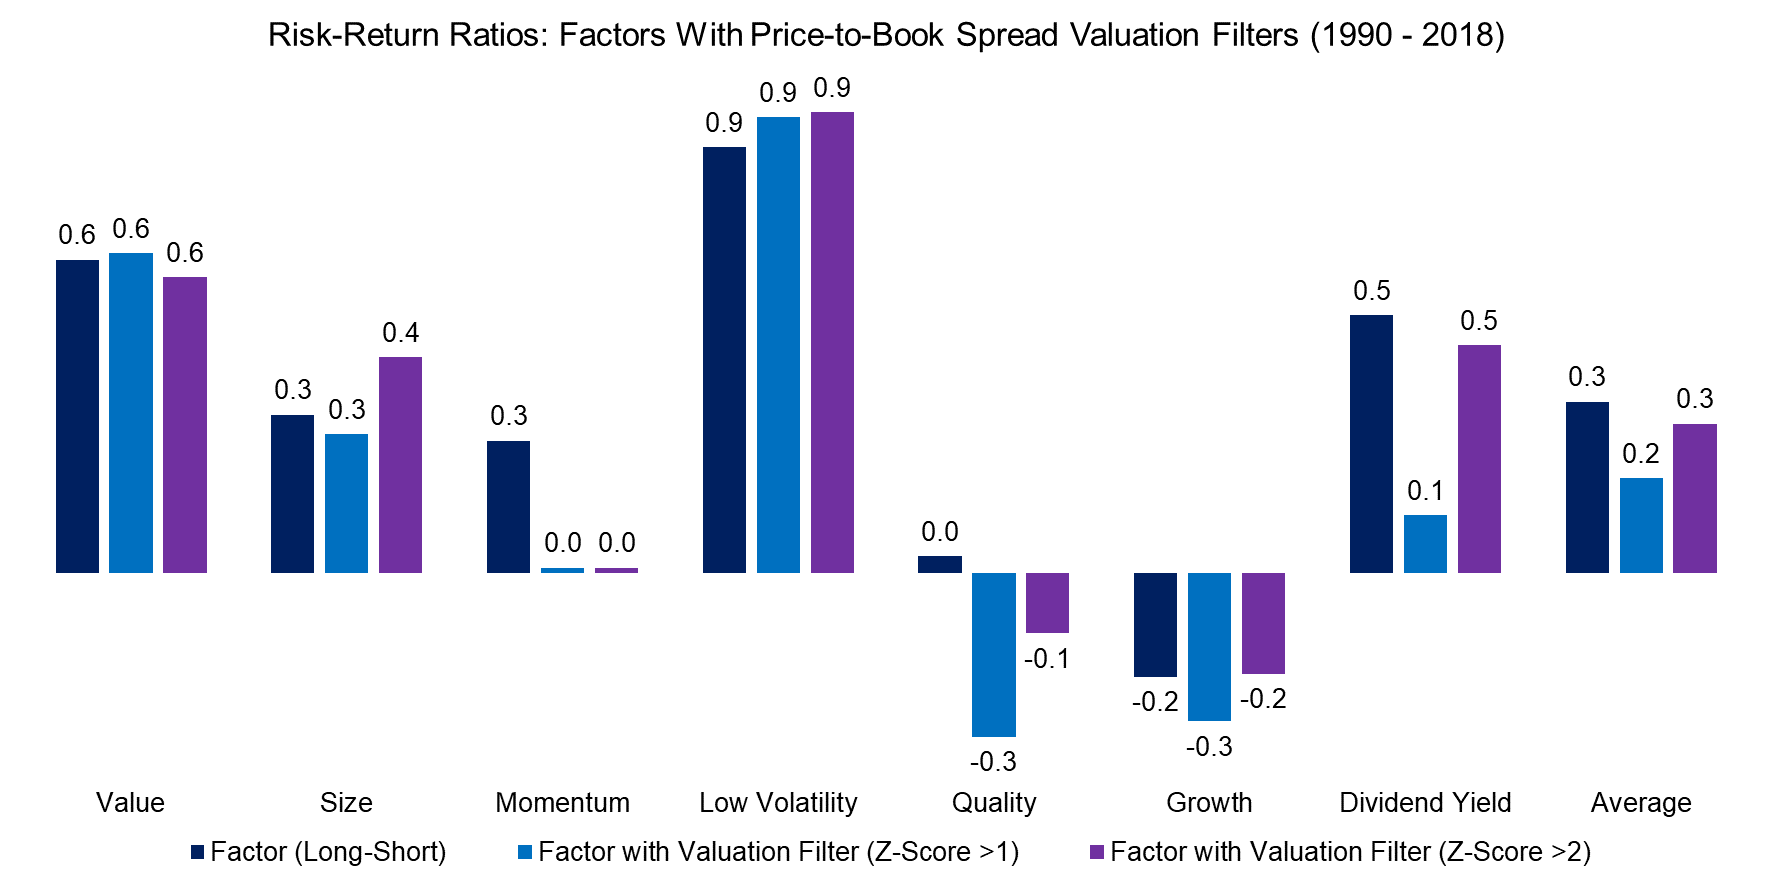 Risk-Return Ratios Factors With Price-to-Book Spread Valuation Filters (1990 - 2018)